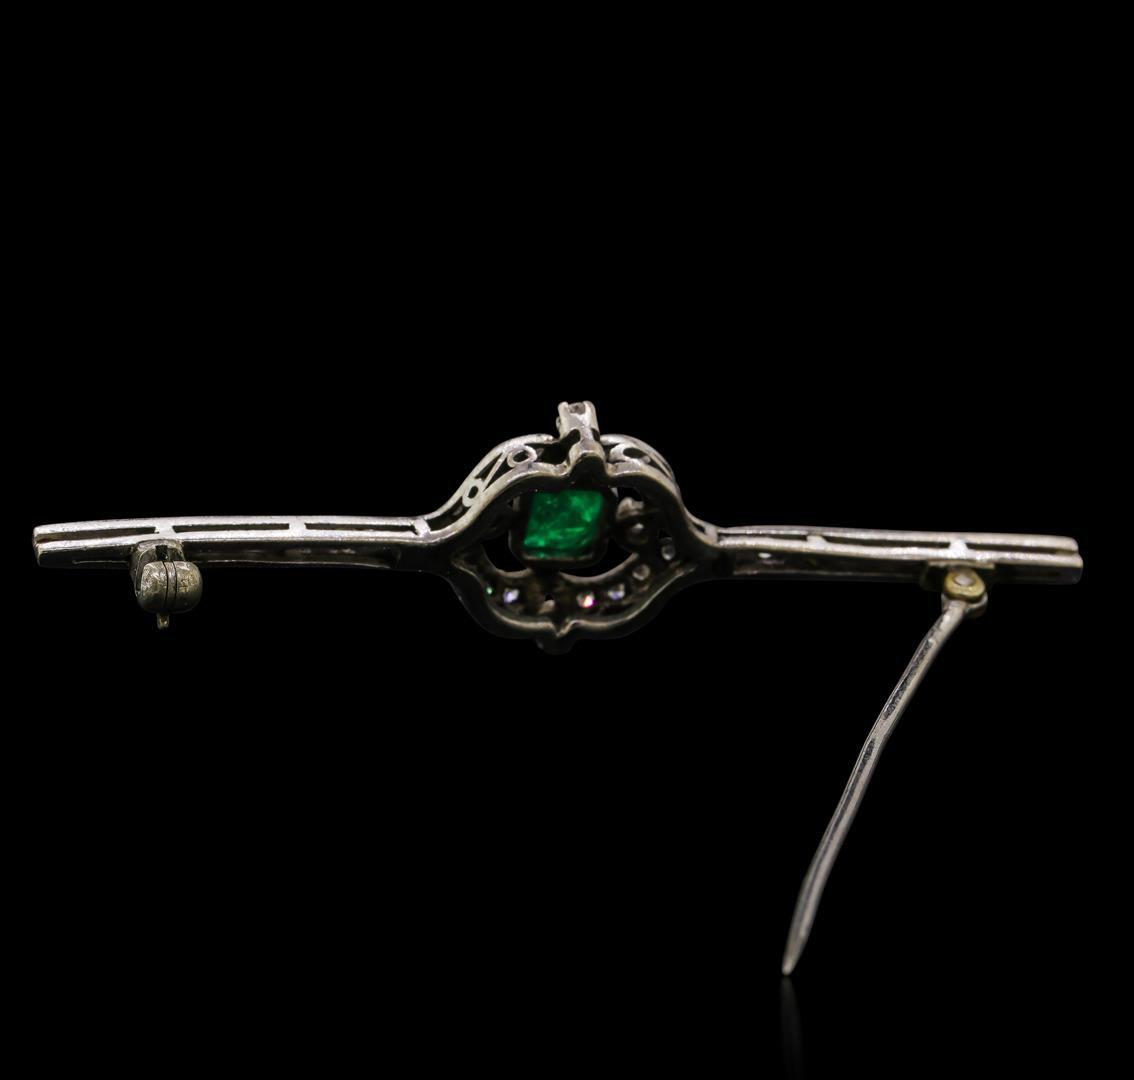 0.51 ctw Emerald and Diamond Pin - 10KT White Gold